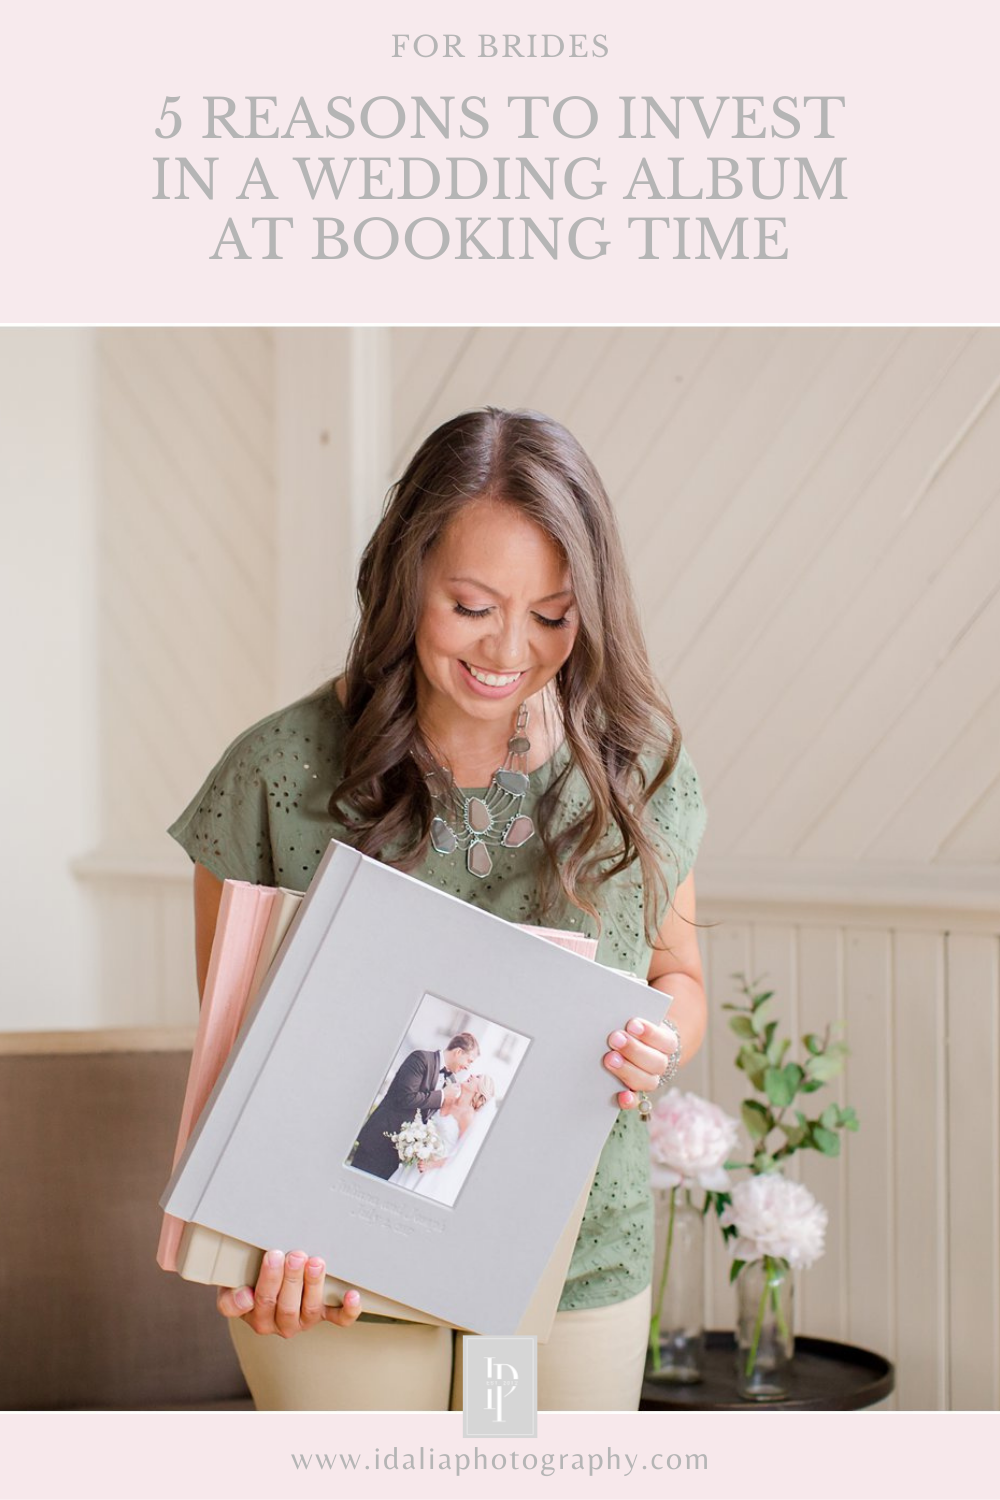 5 Reasons to Invest in a Wedding Album at Booking Time by Idalia Photography